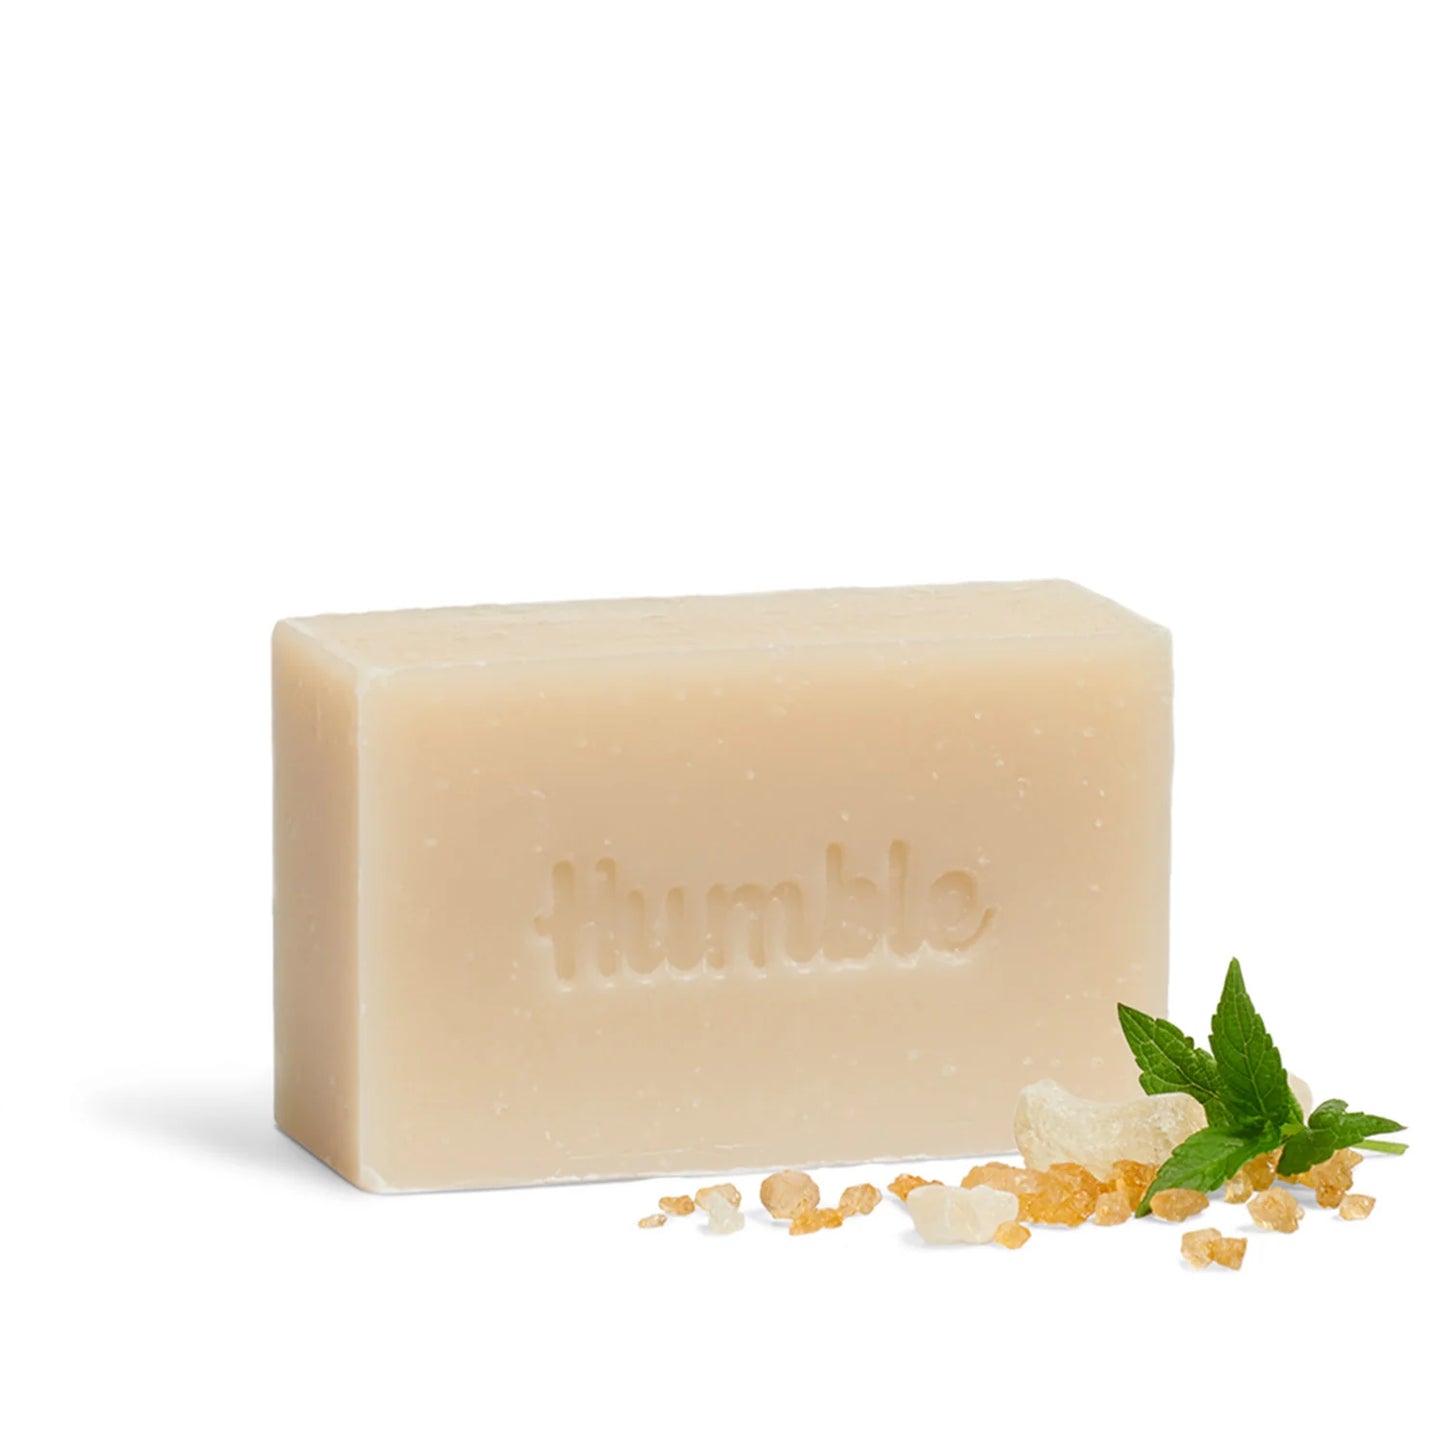 TRAVEL SIZE PatchouIi & Copal all Natural Soap Bar 1 oz by Humble Brands - gift